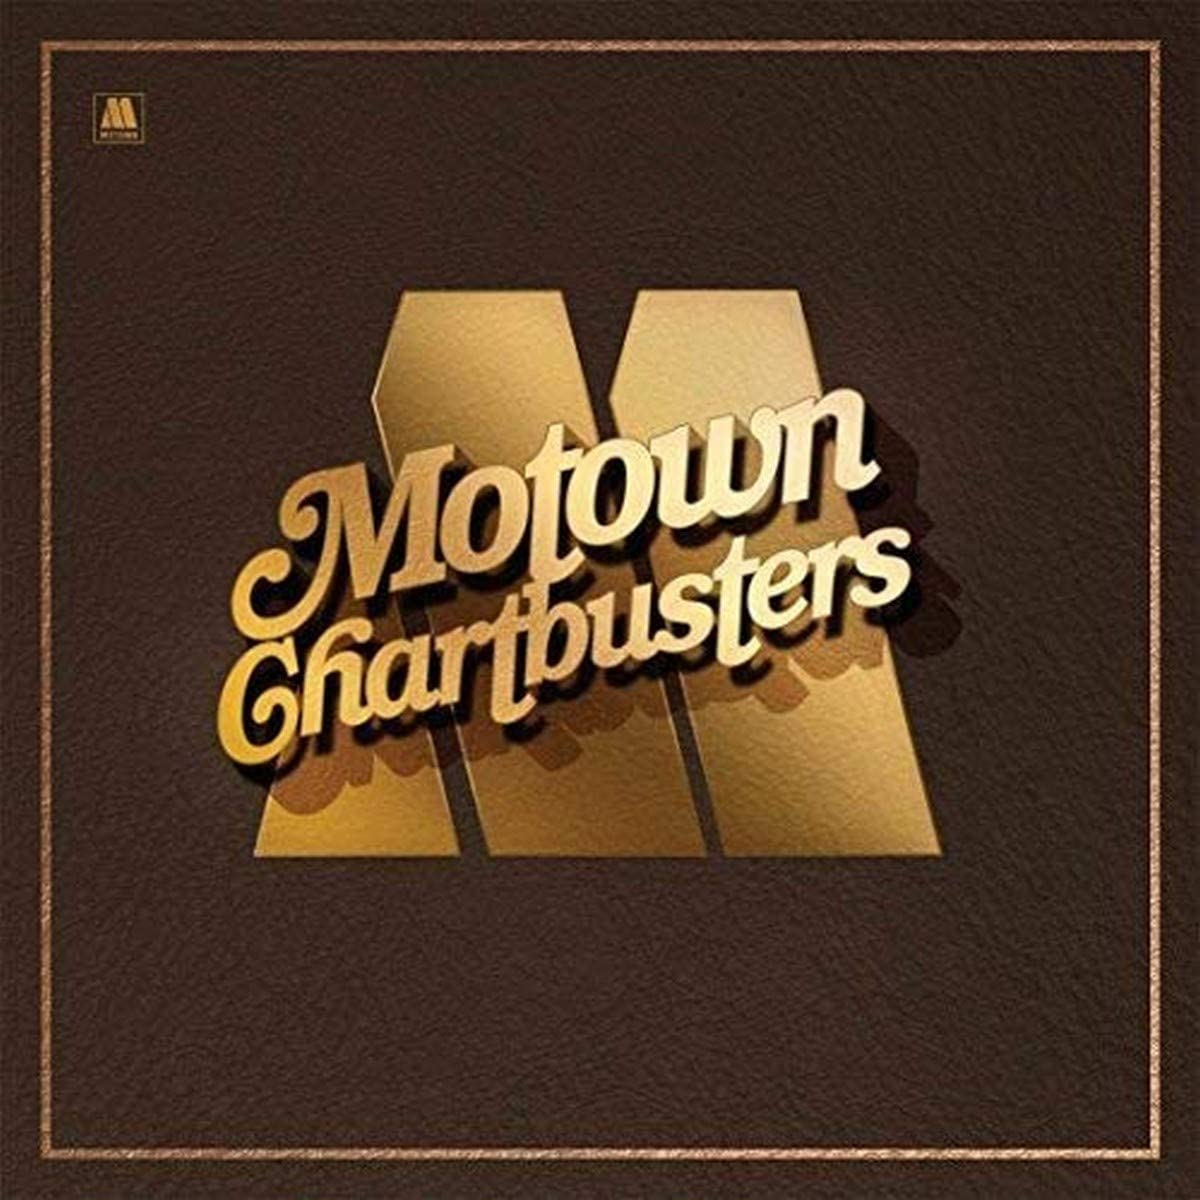 Motown Chartbusters Compilation